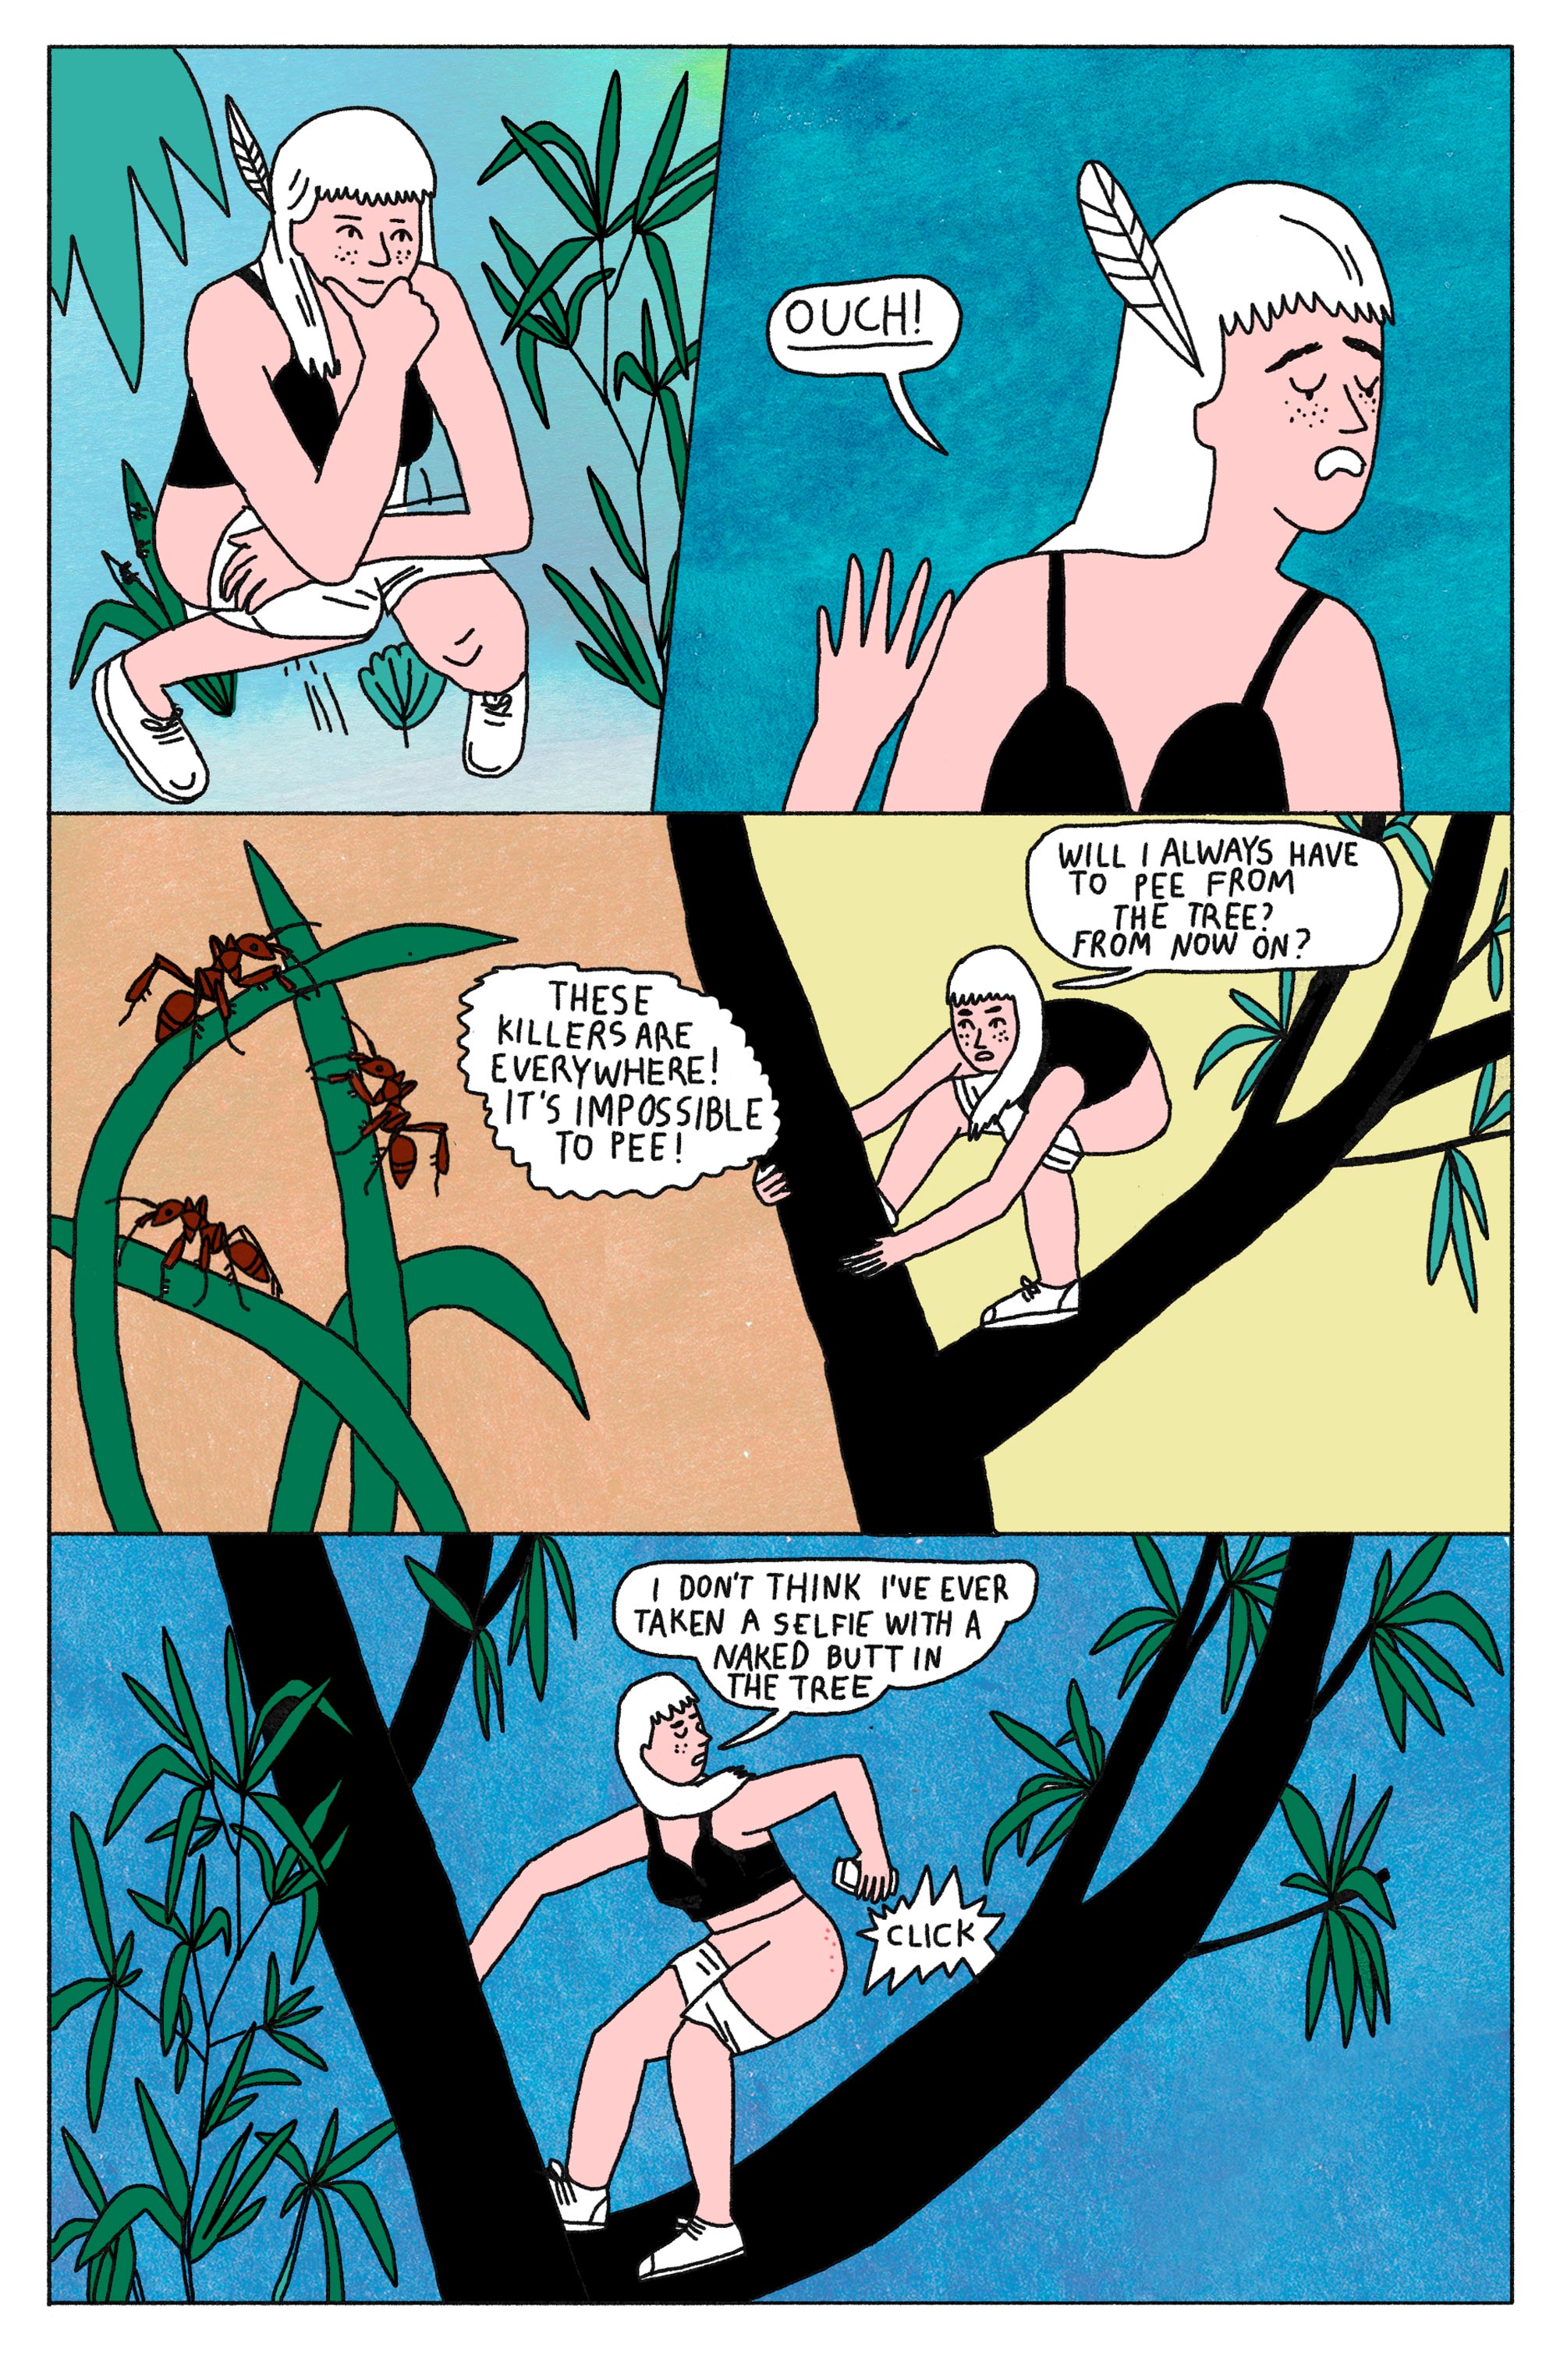 Comic Girls Nude - Lucy the Confused Girl in the Jungle,' Today's Comic by ...